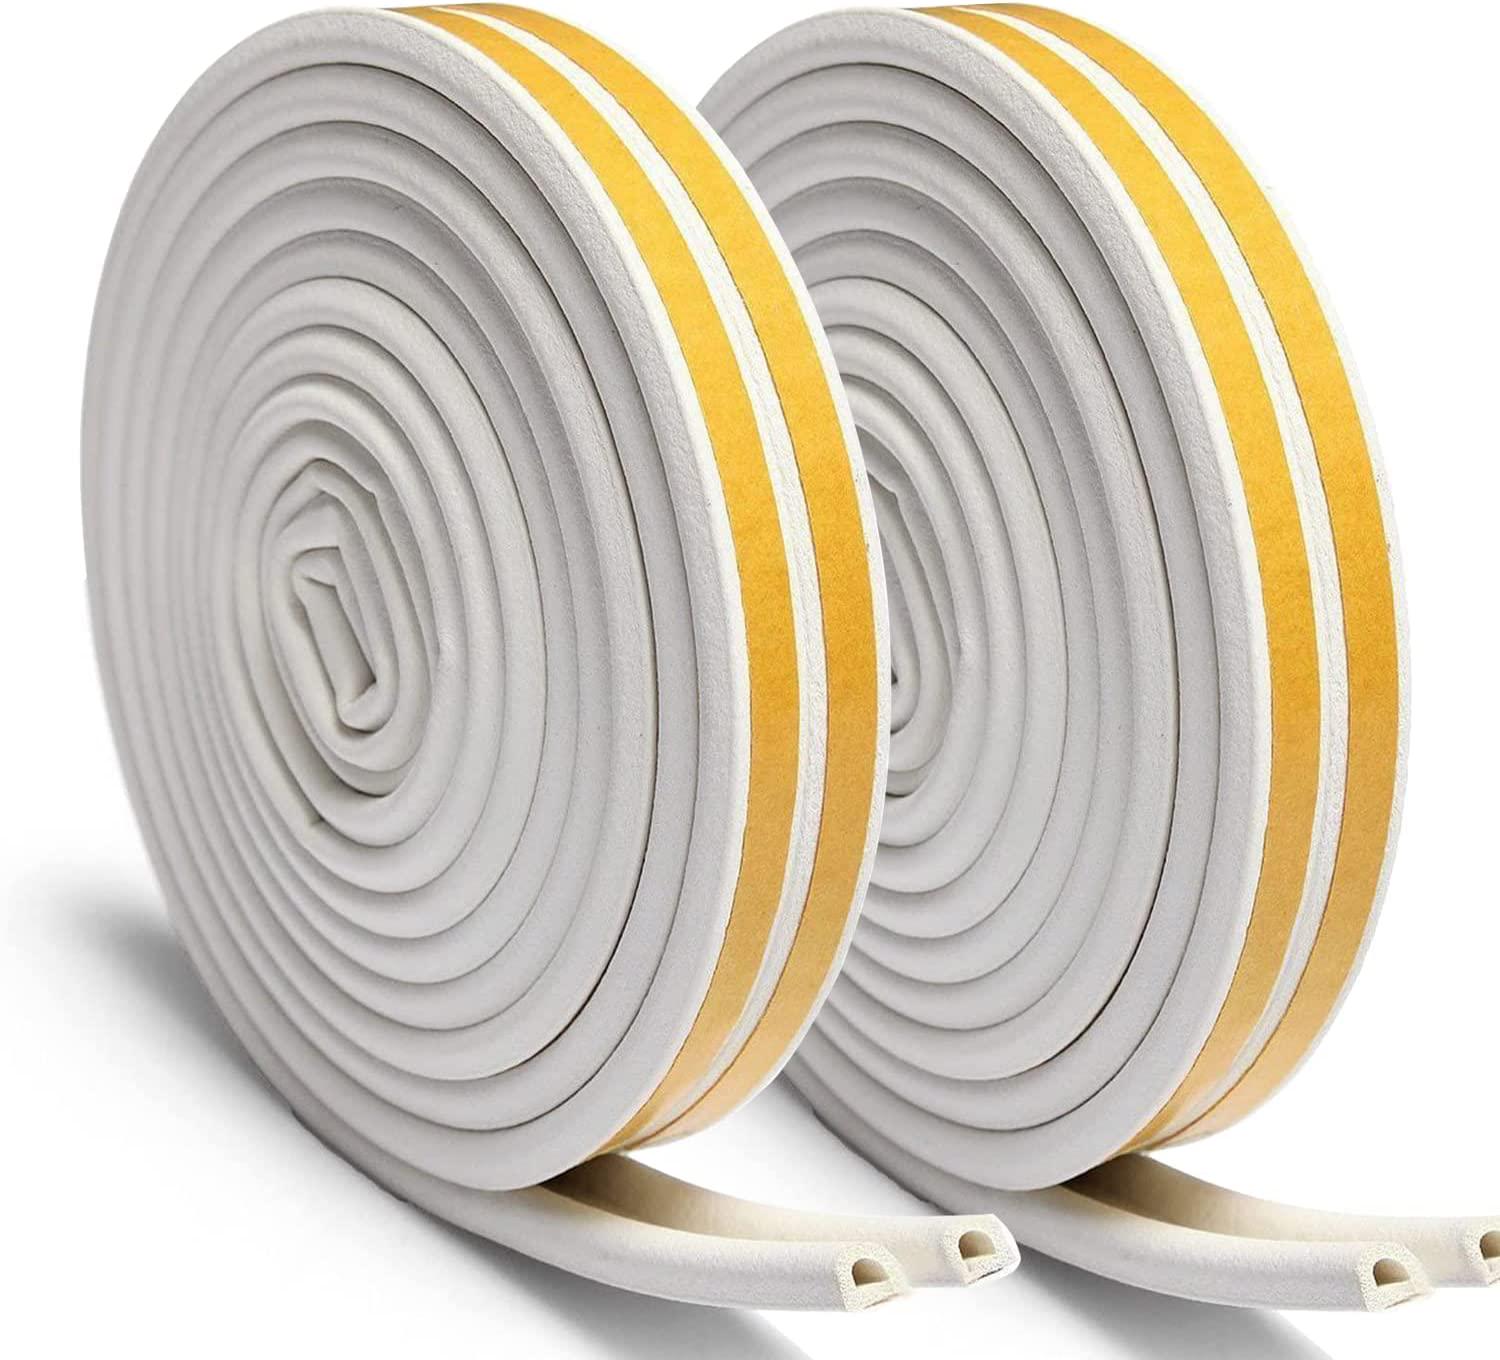 Maxee, Maxee D Type Total Length 52.5ft(16m) White Door Bottom Strip, Self-Adhesive Foam Tape Sealing Strips, Effectively Insulate Noise, Insulation Weatherproof Doors and Windows Seals 2PCS